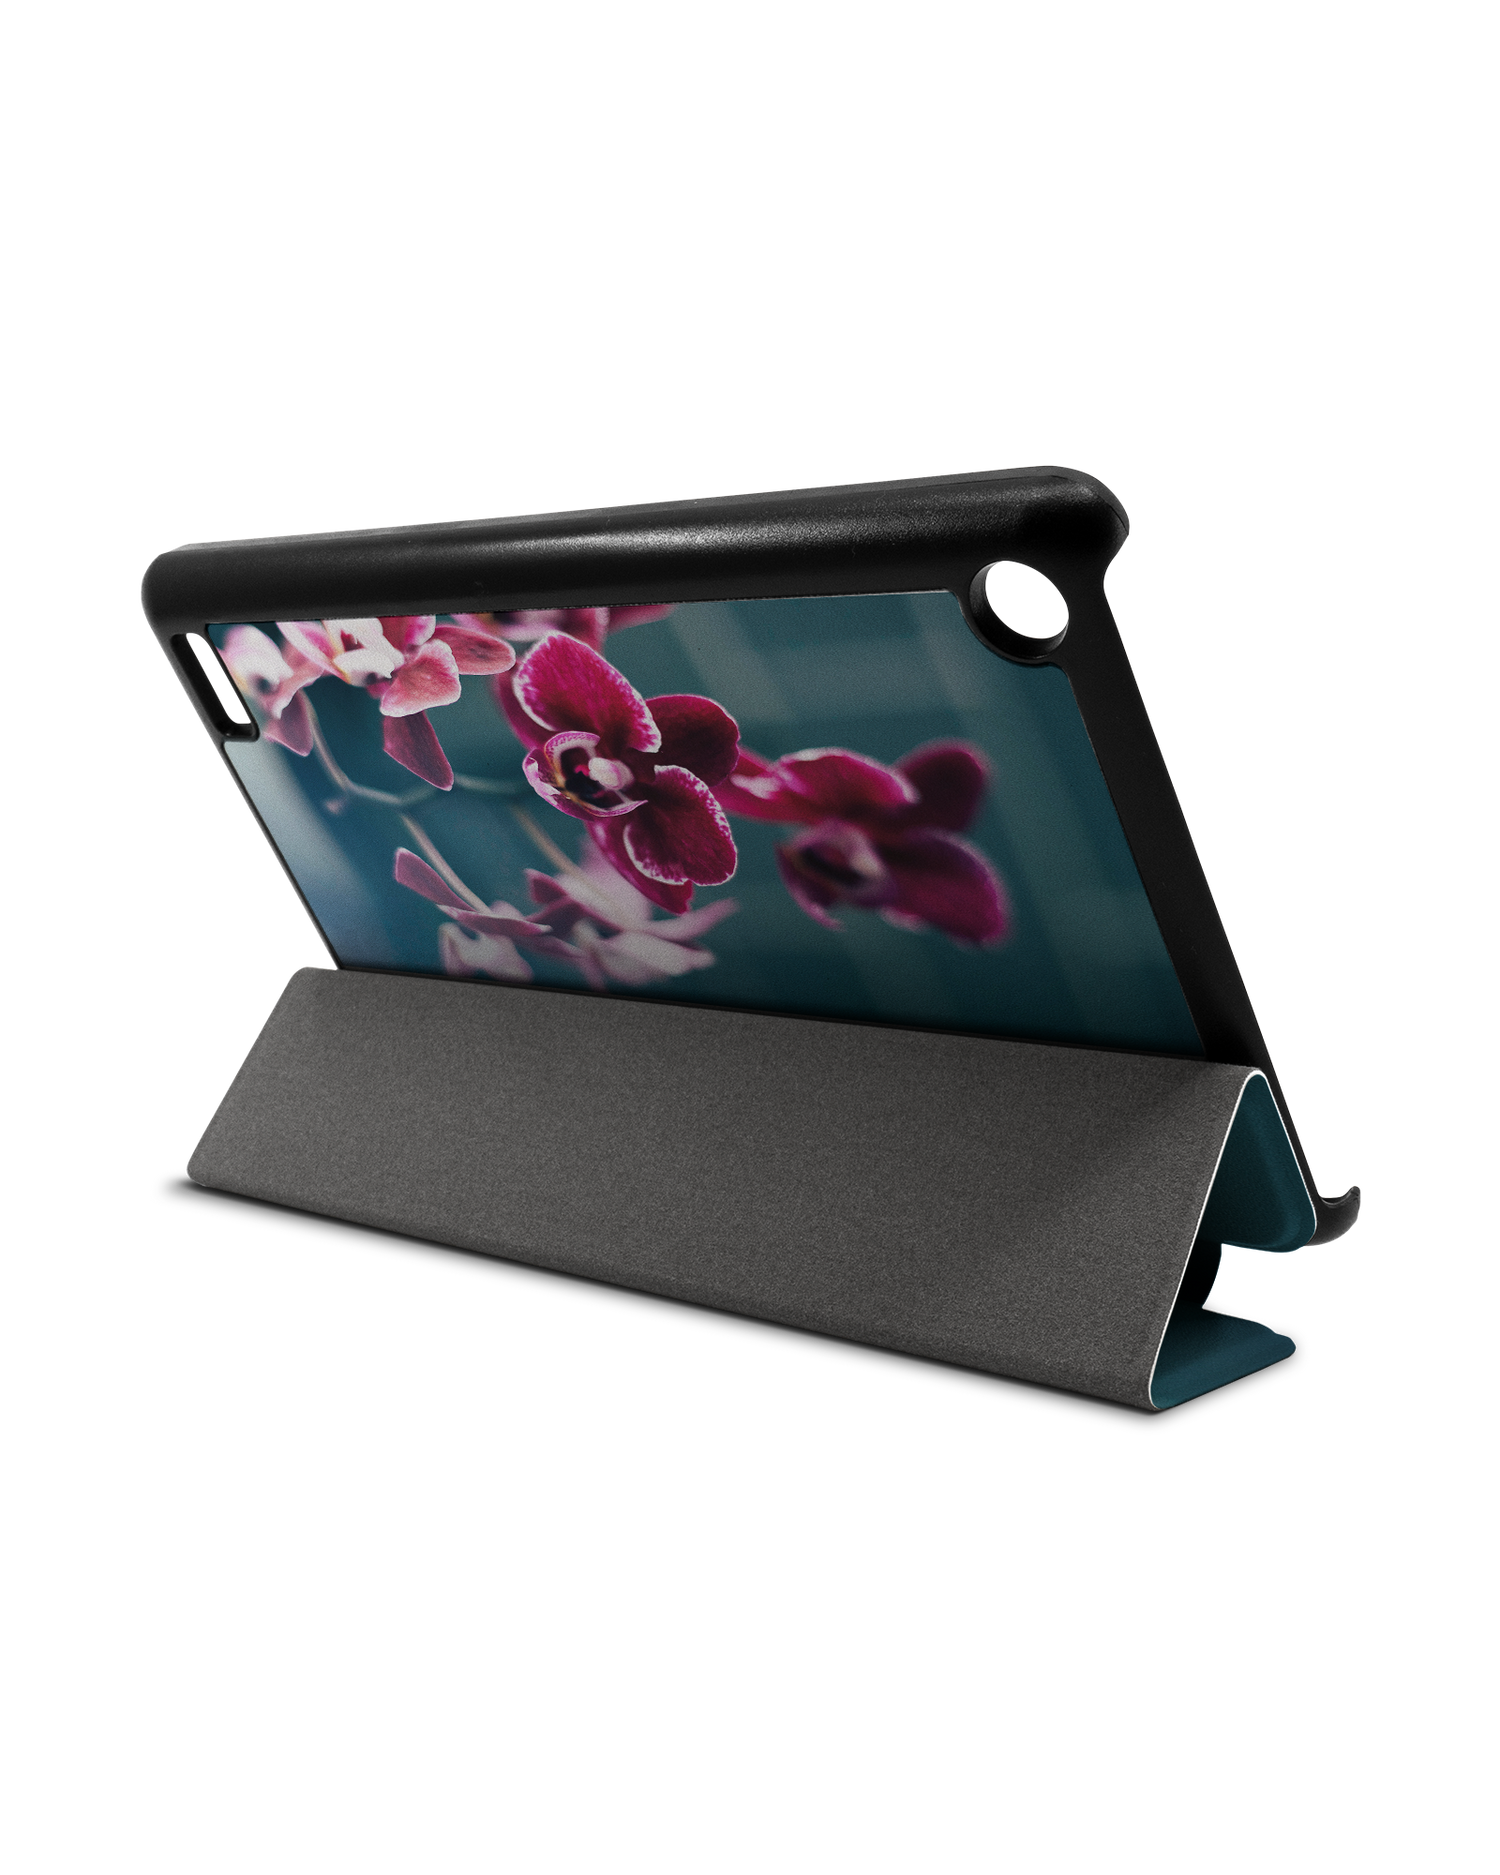 Orchid Tablet Smart Case for Amazon Fire 7: Used as Stand